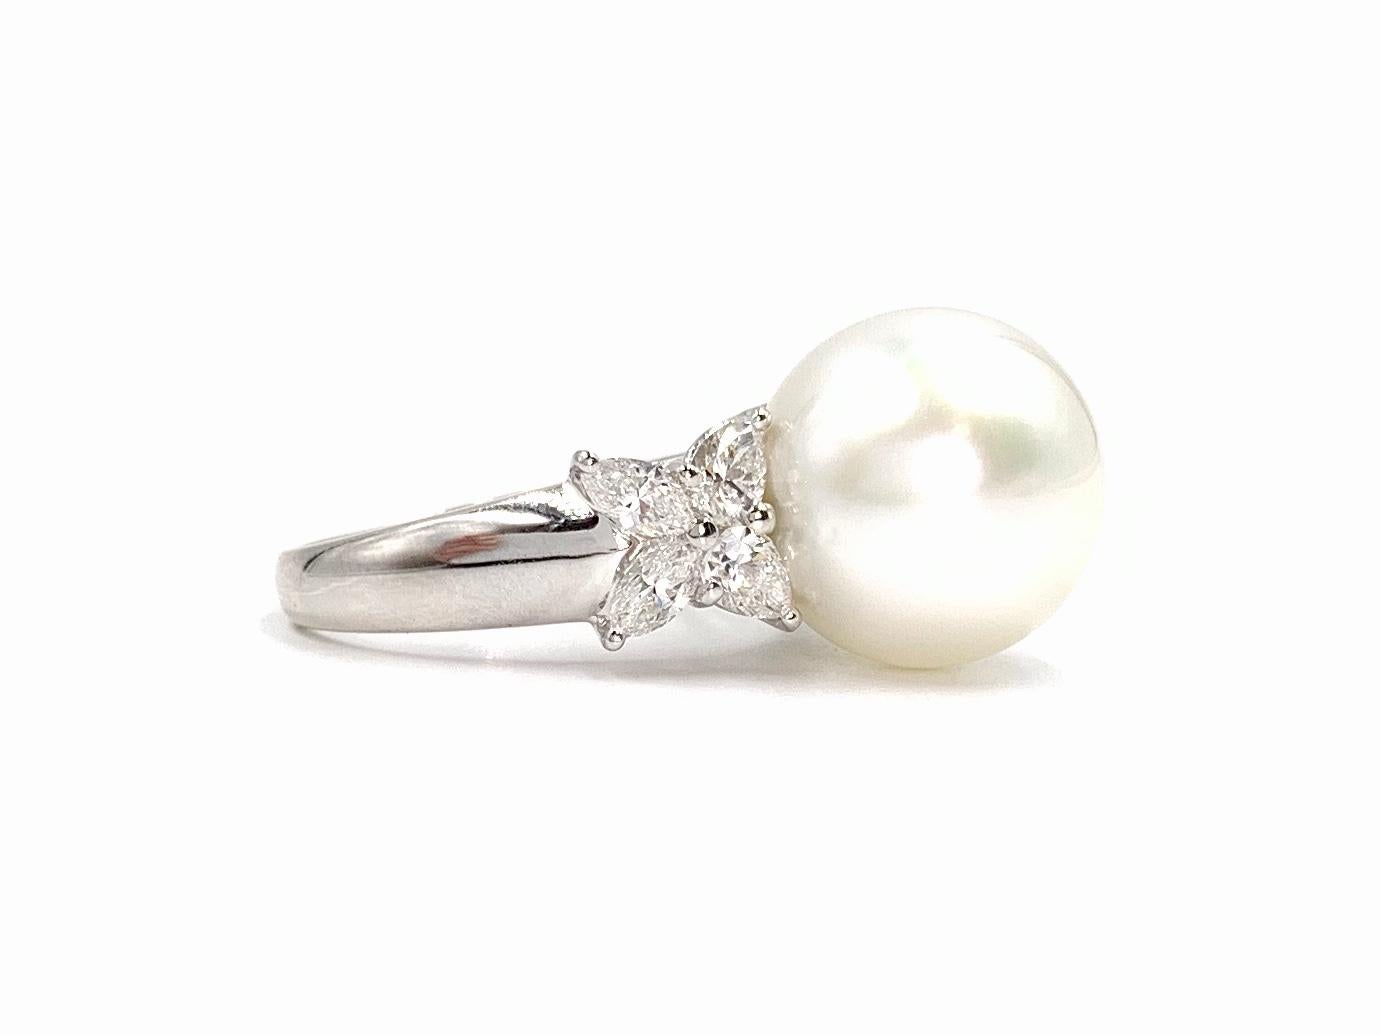 A sophisticated and classically designed 18 karat white gold cocktail ring featuring 1.20 carats of pear shape and marquise cut diamonds and showcasing a 13.4mm lustrous white genuine south sea pearl. Pearl has a beautiful evenly round shape and